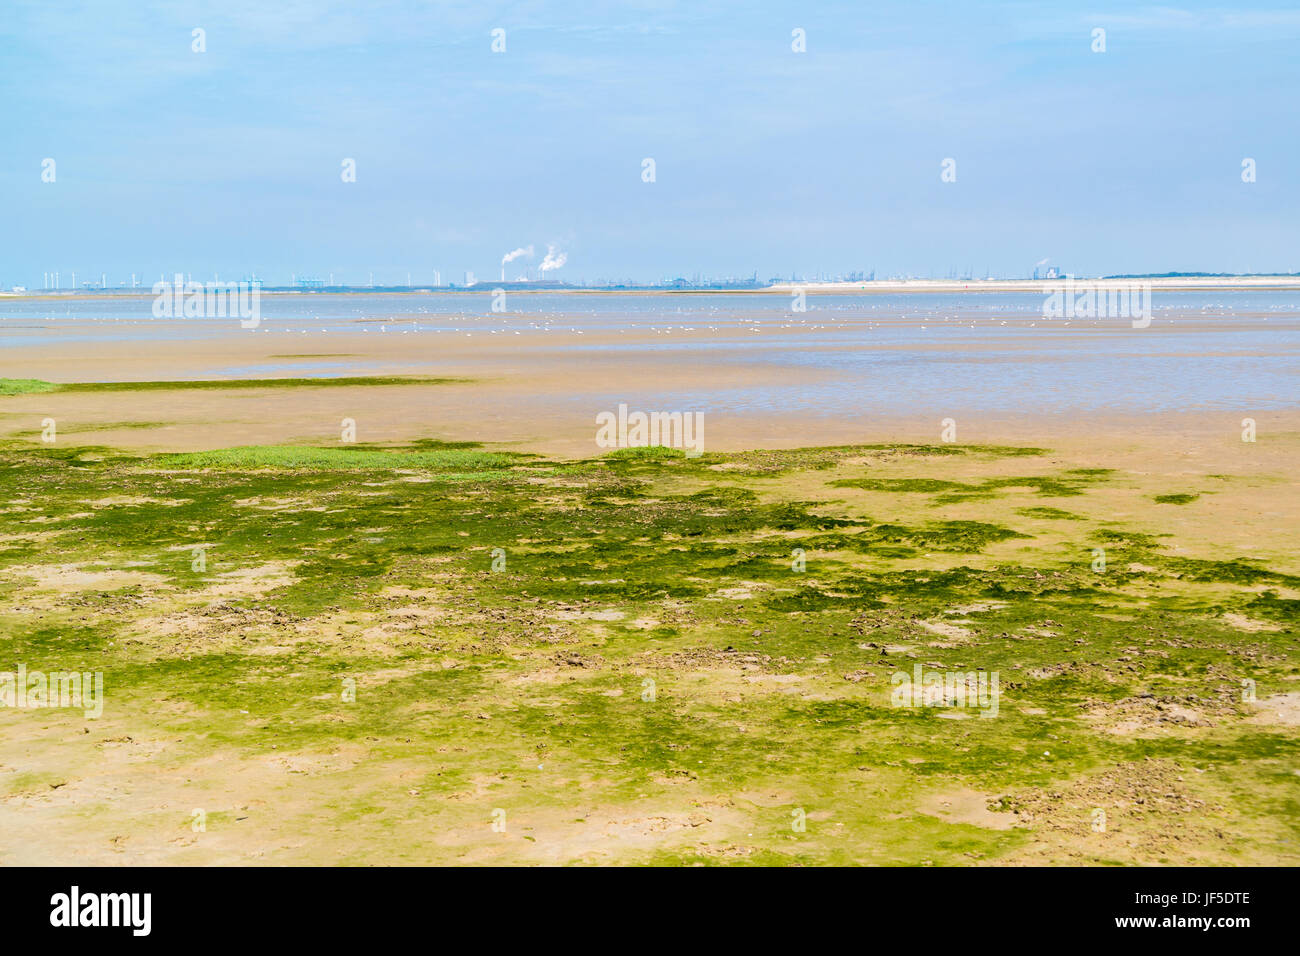 Panorama of sandflat and mudflat landscape at low tide, nature reserve near Maasvlakte and port of Rotterdam, Netherlands Stock Photo